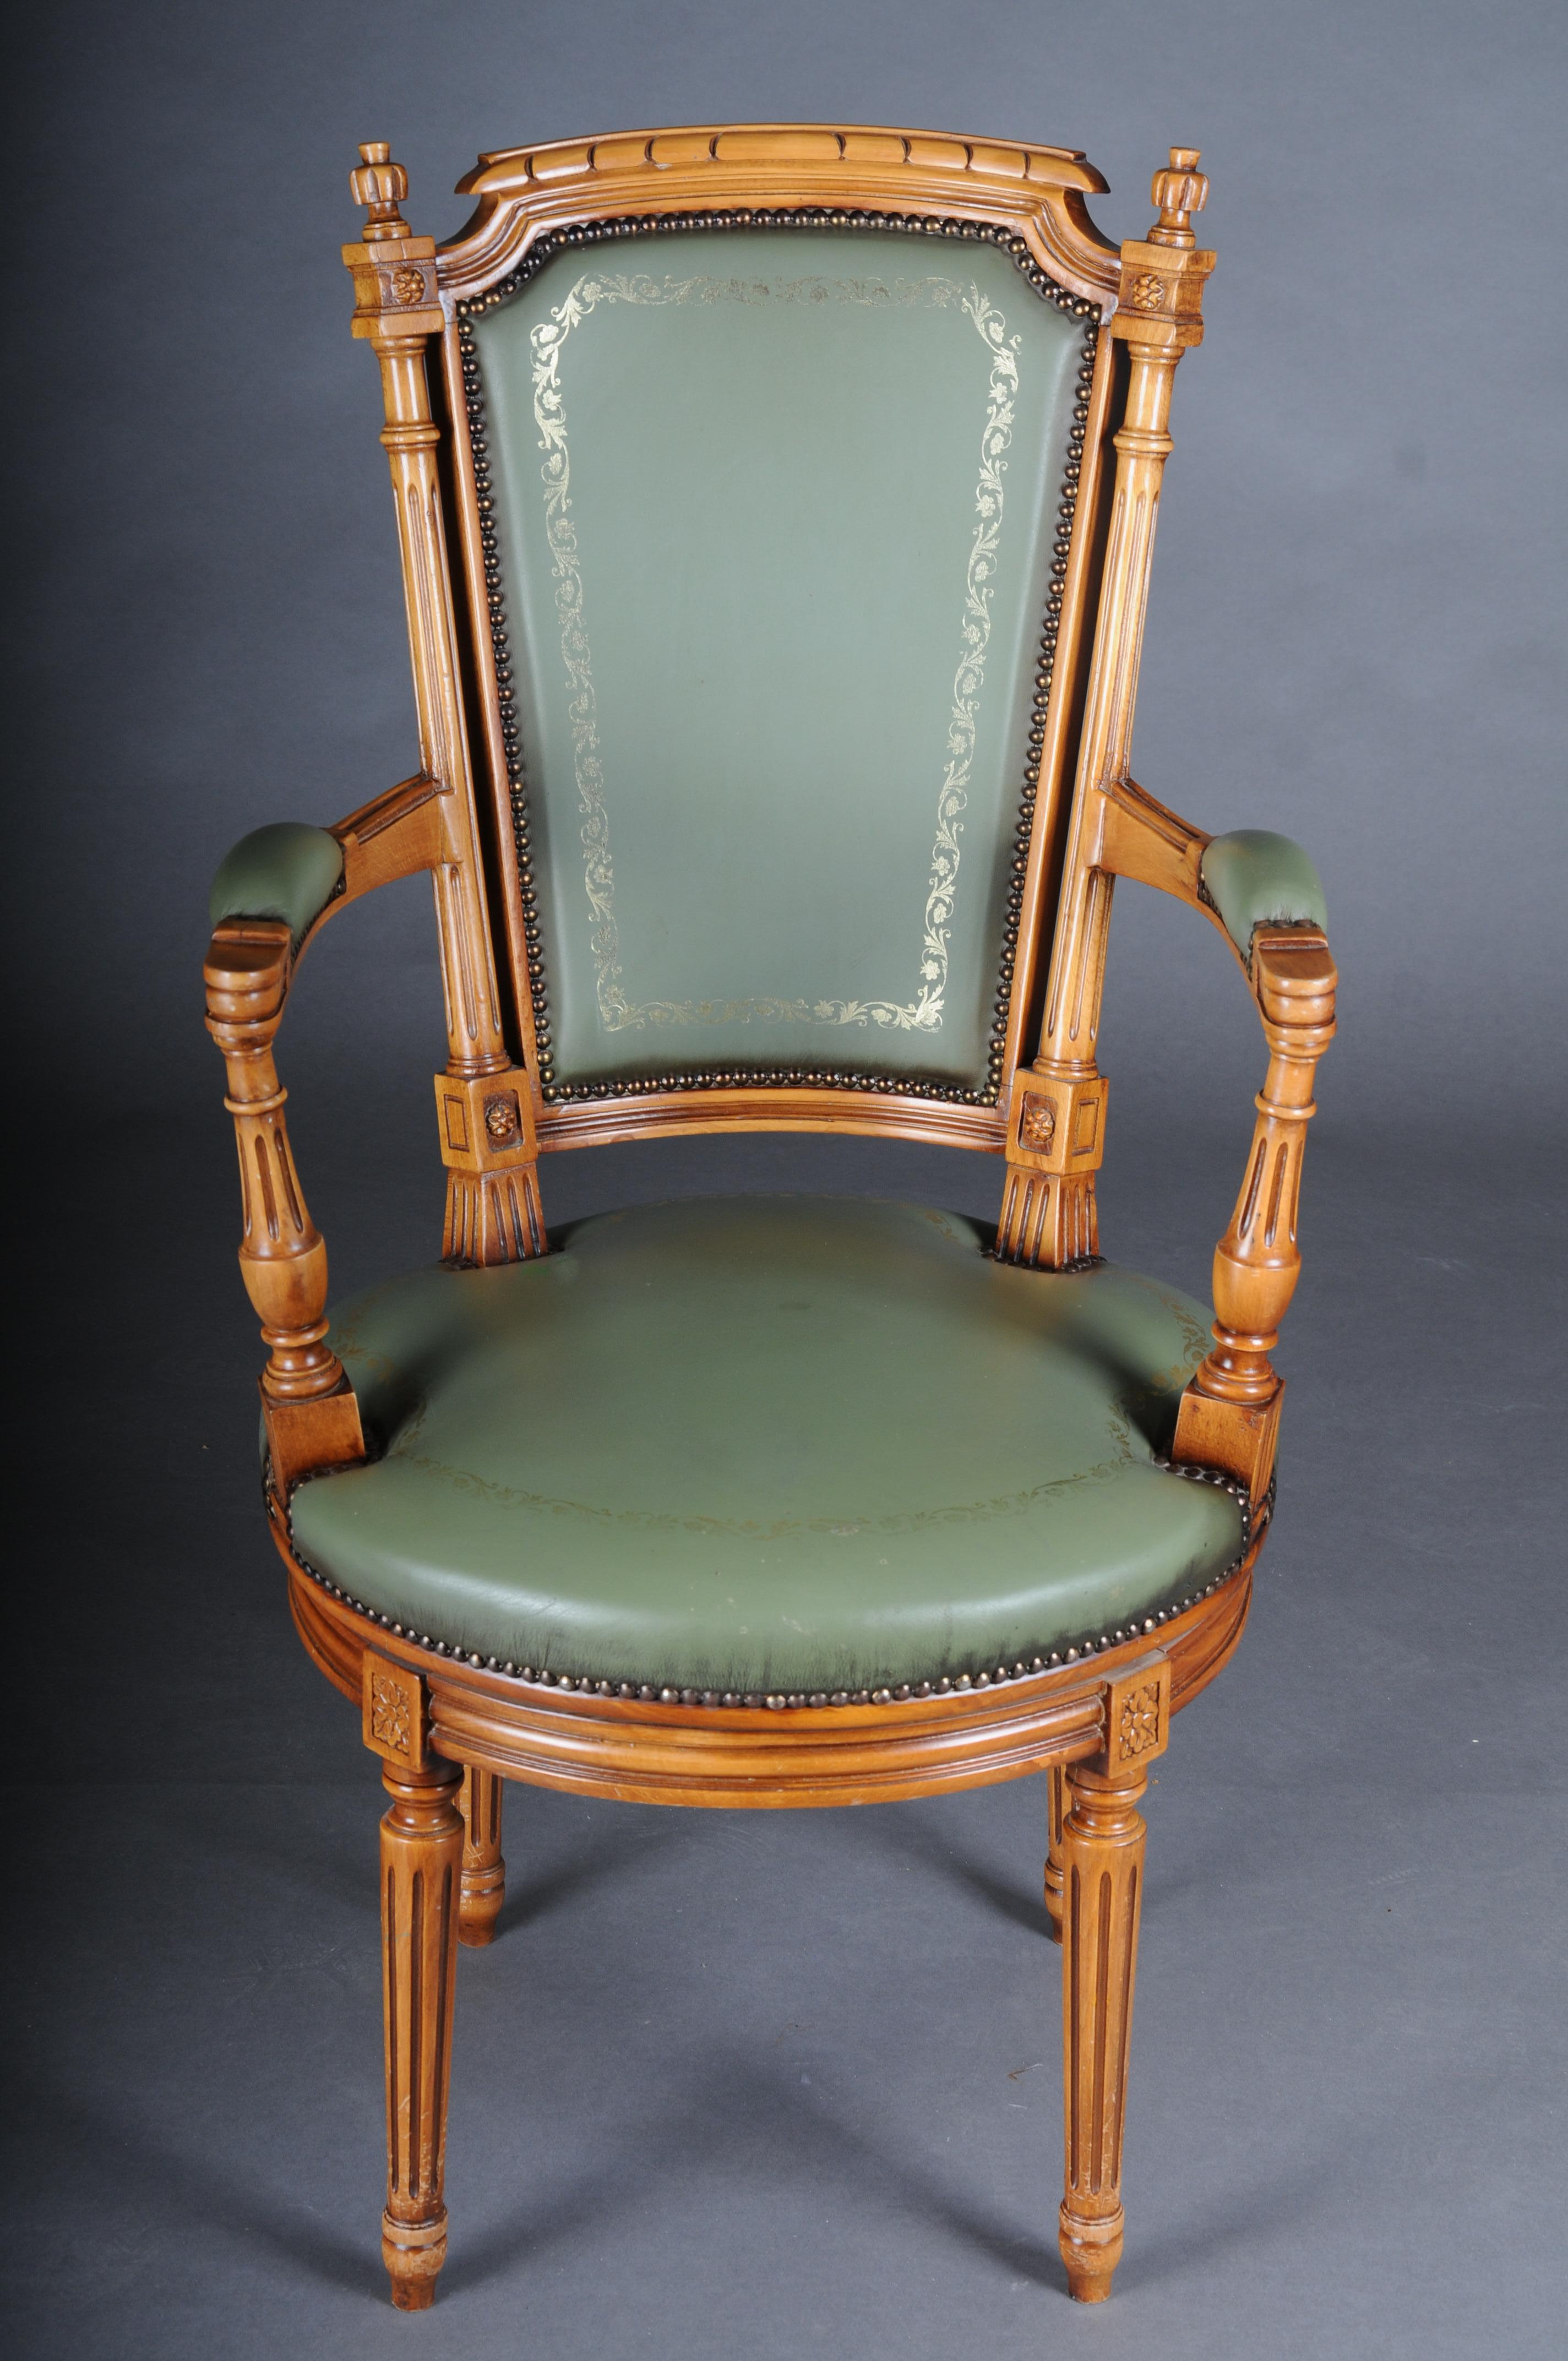 British 20th Century Chair English Armchair Leather, Yew Wood For Sale